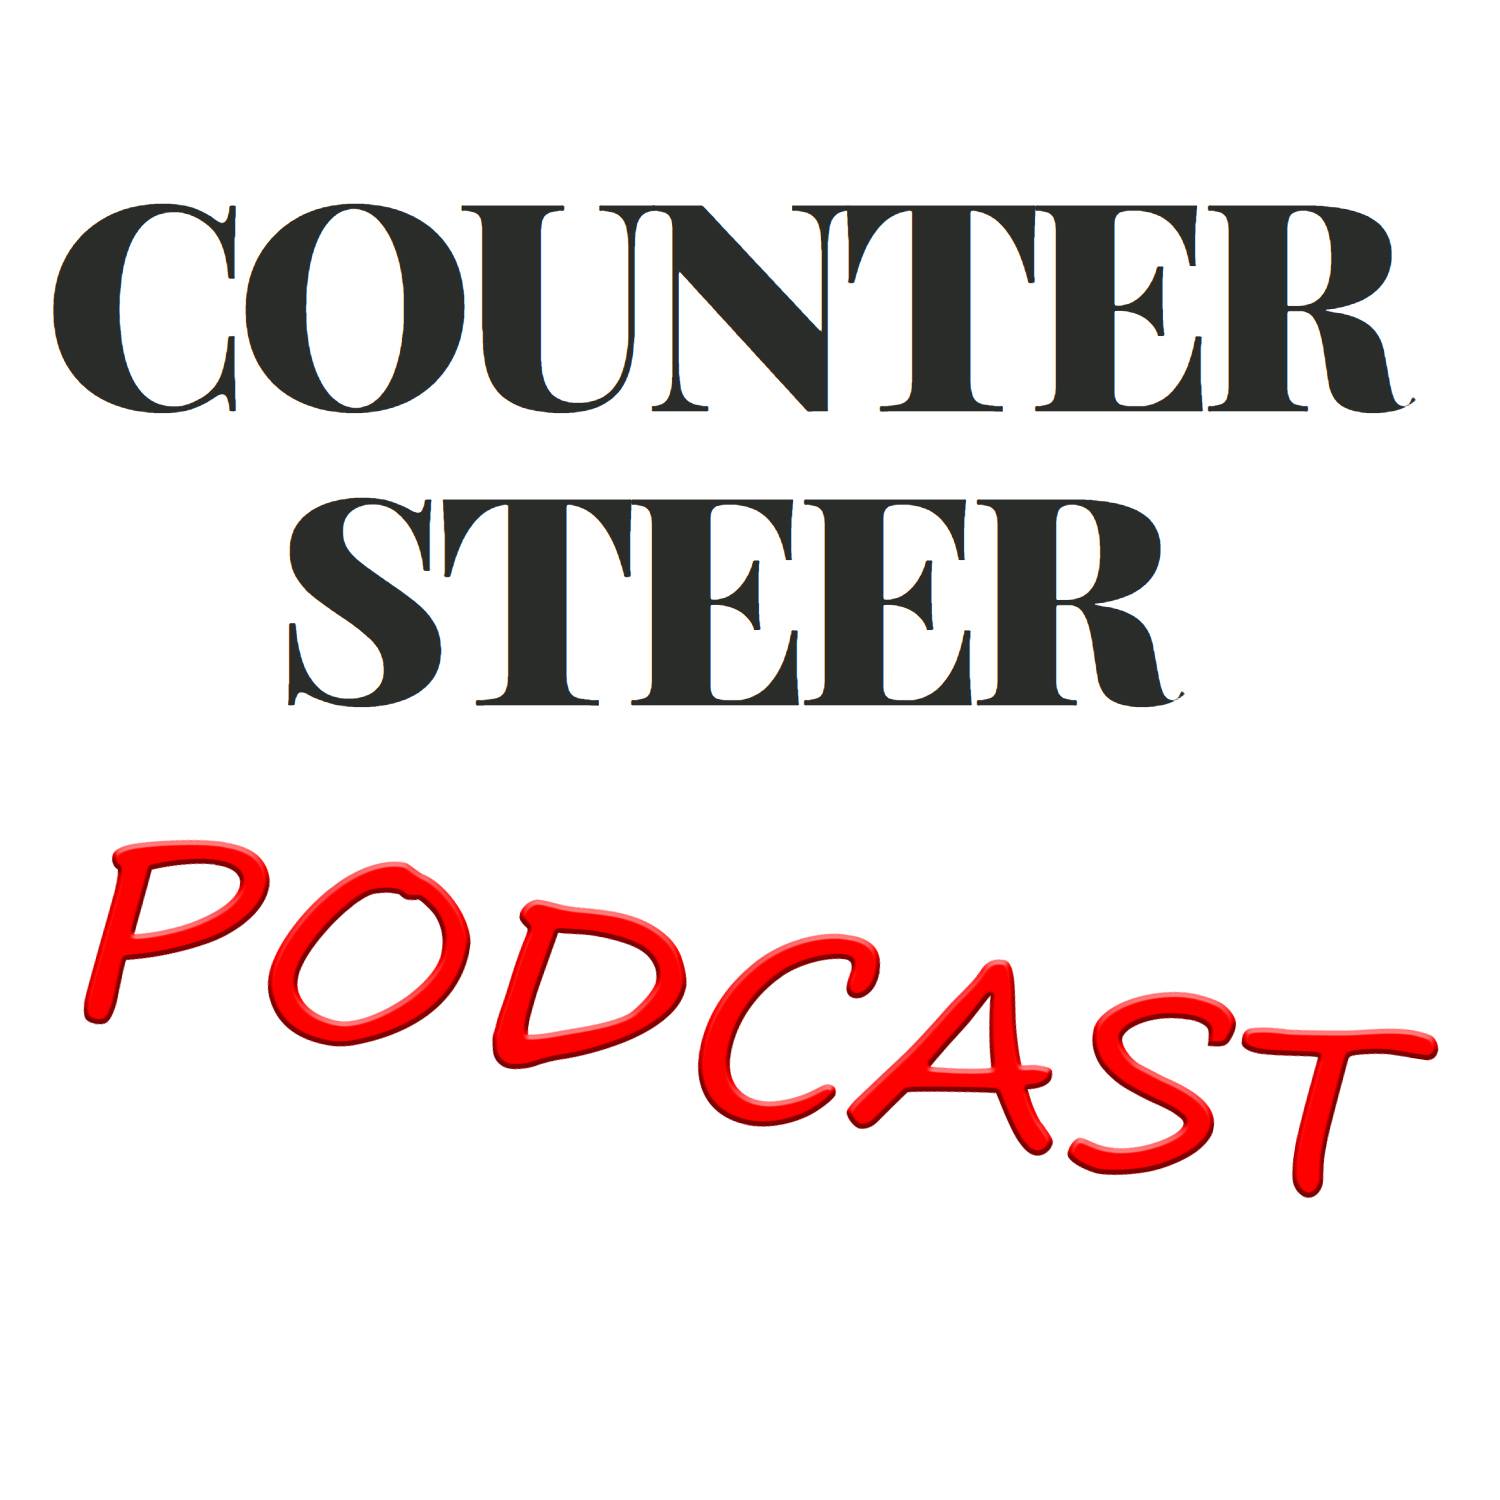 Artwork for podcast Countersteermag podcast